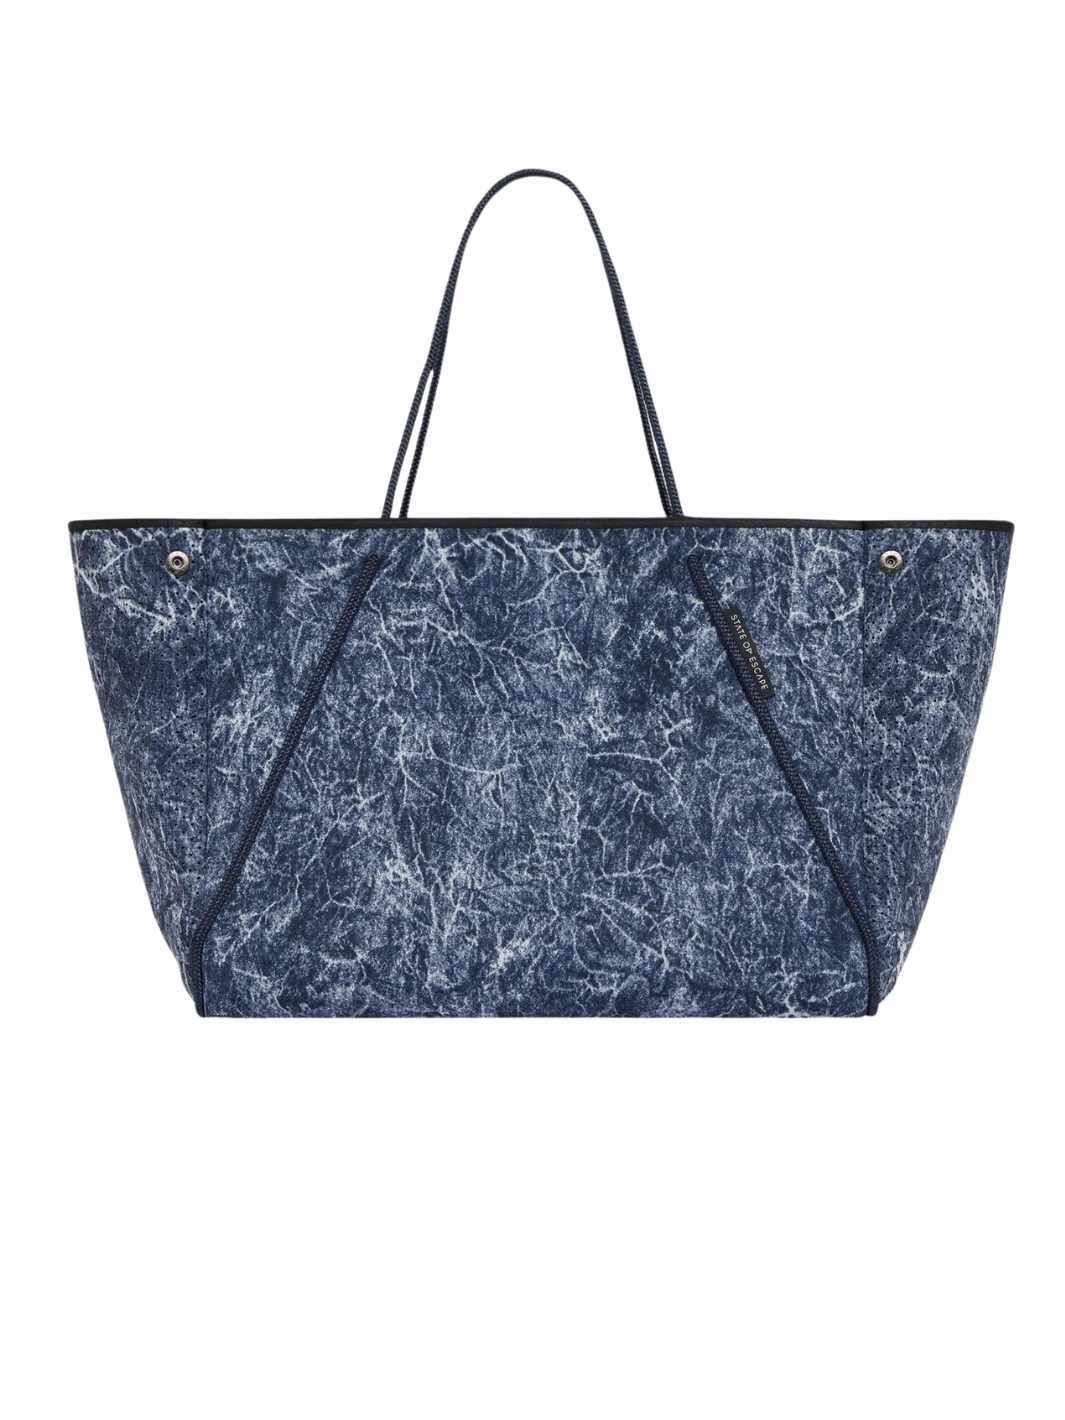 State of Escape Bags Tote Bag | Guise Tote Acid Washed Indigo